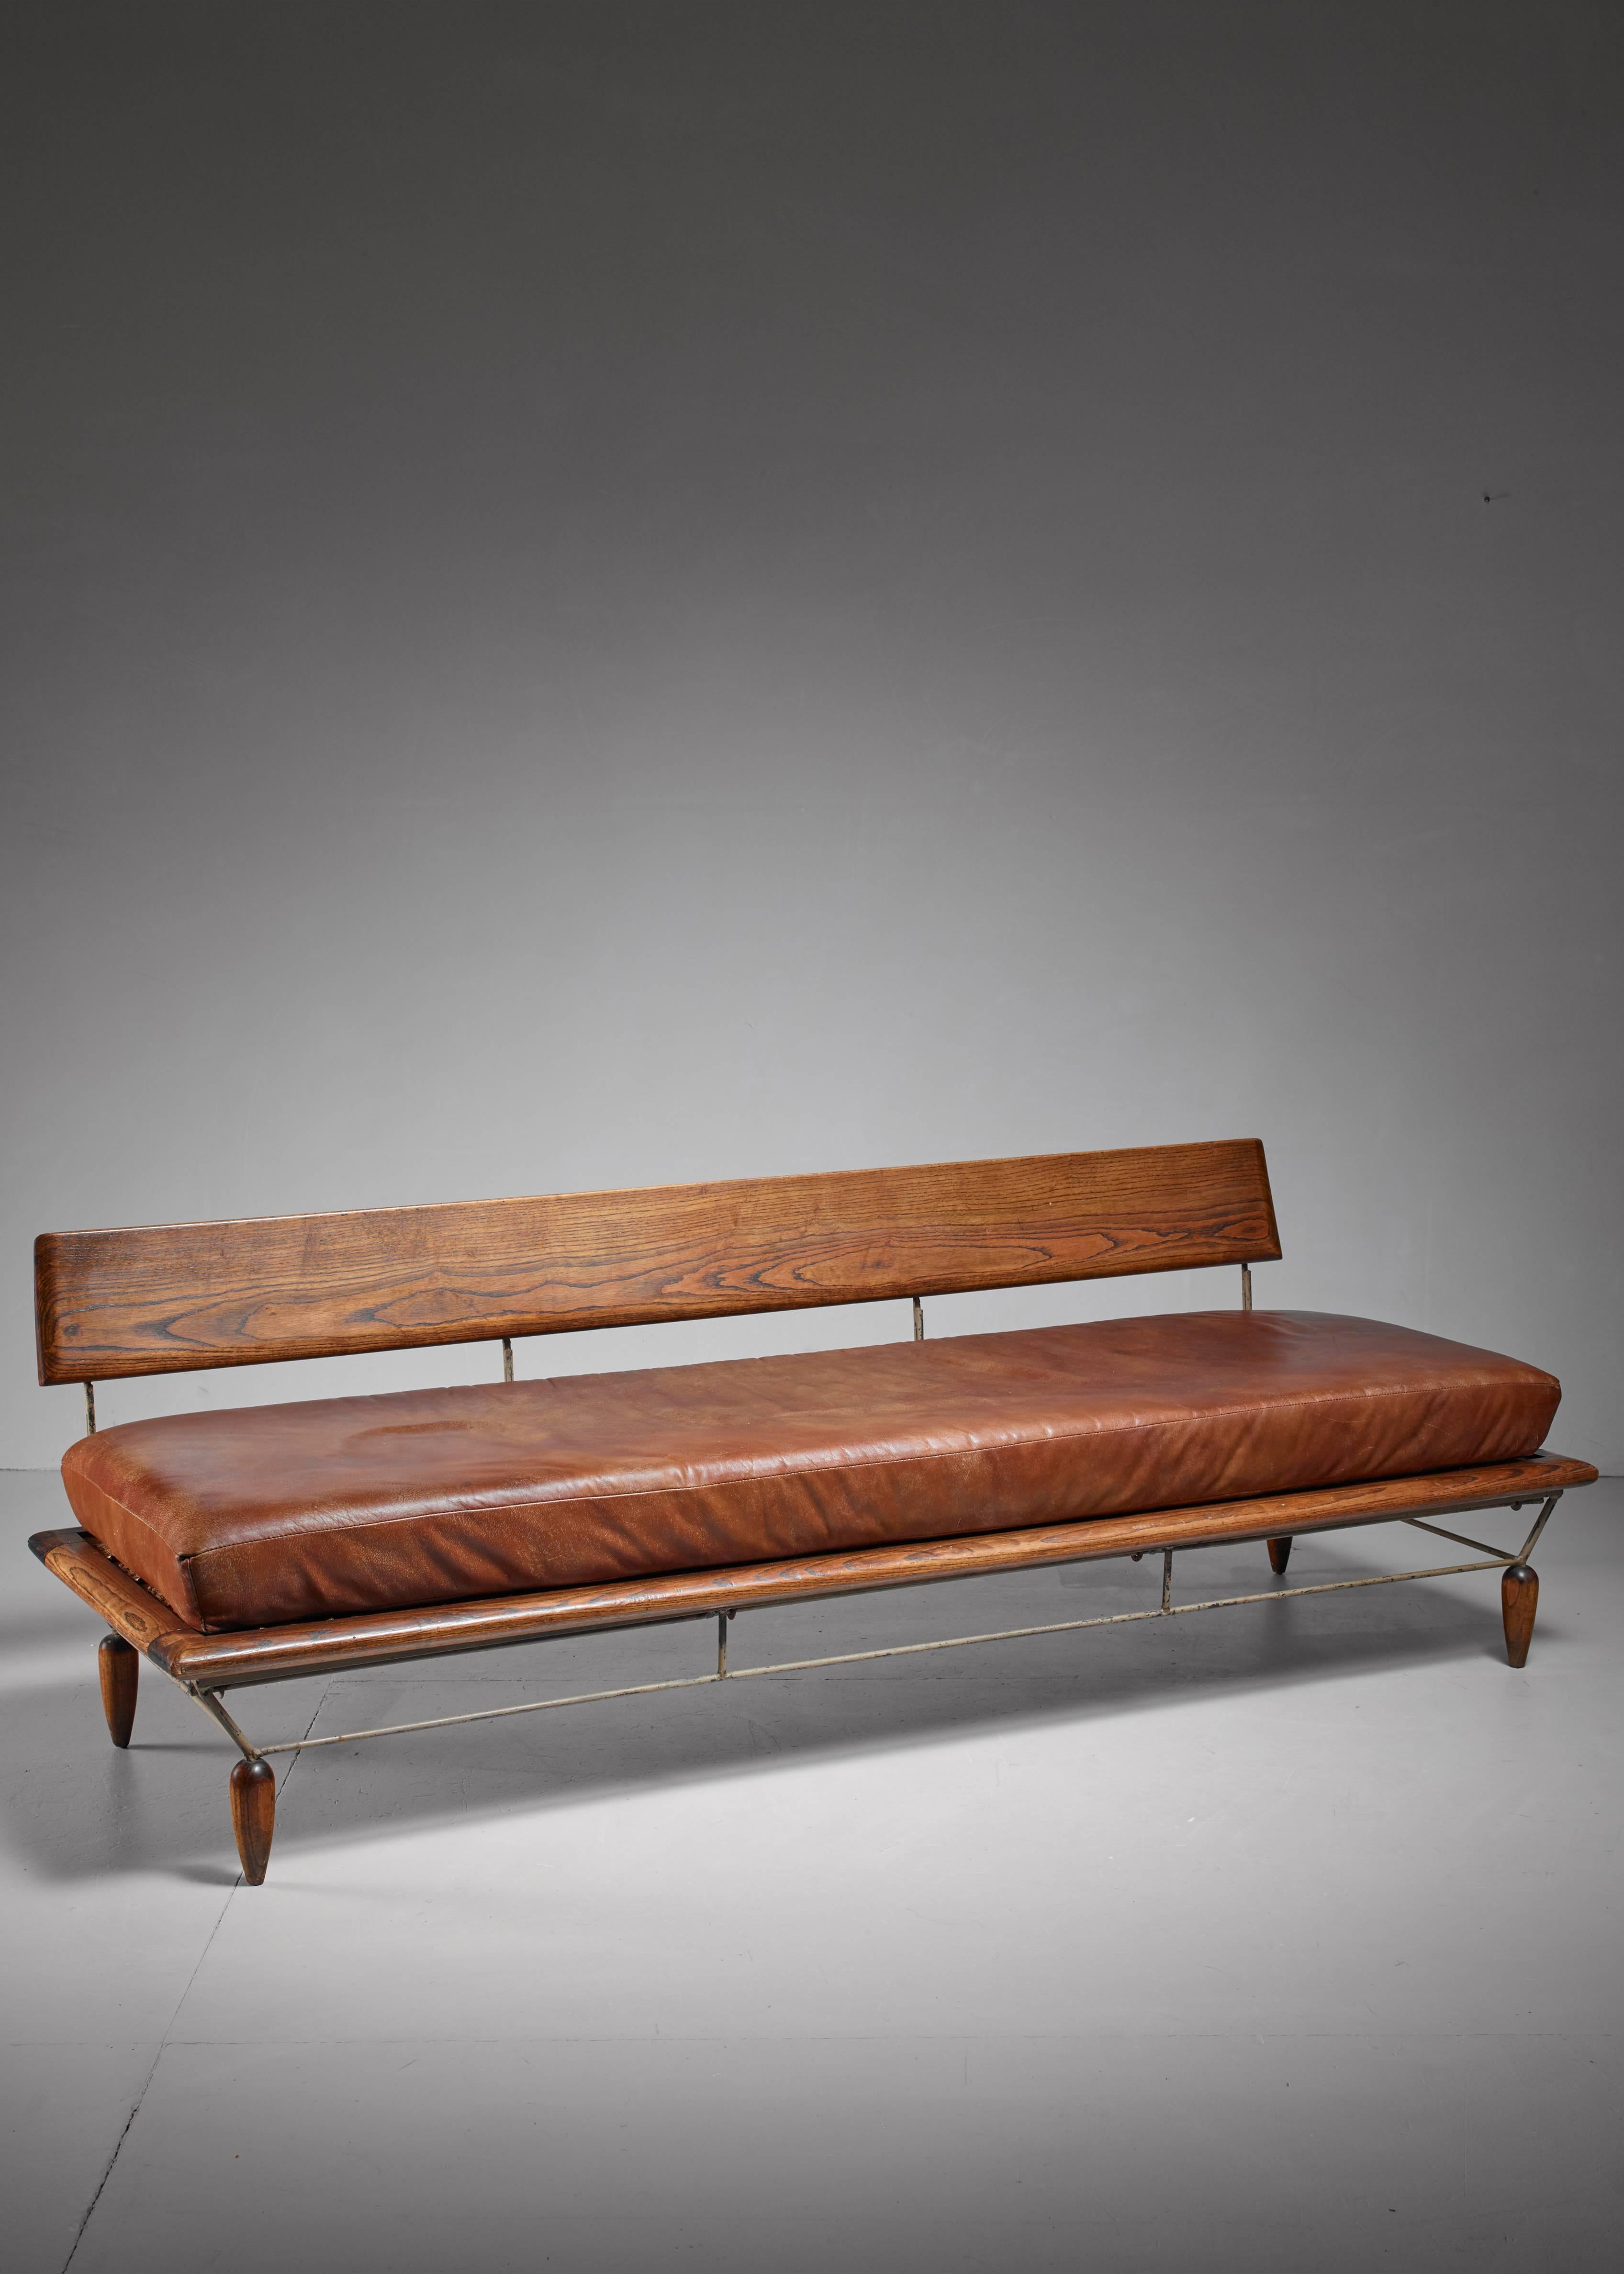 A unique sofa by Arizona designer Allen Ditson and his artist wife Lee Porzio. The chair is made of a metal and oak frame with loose brown leather cushions. The seating can be placed in two different positions; straight and slightly tilting.
* This